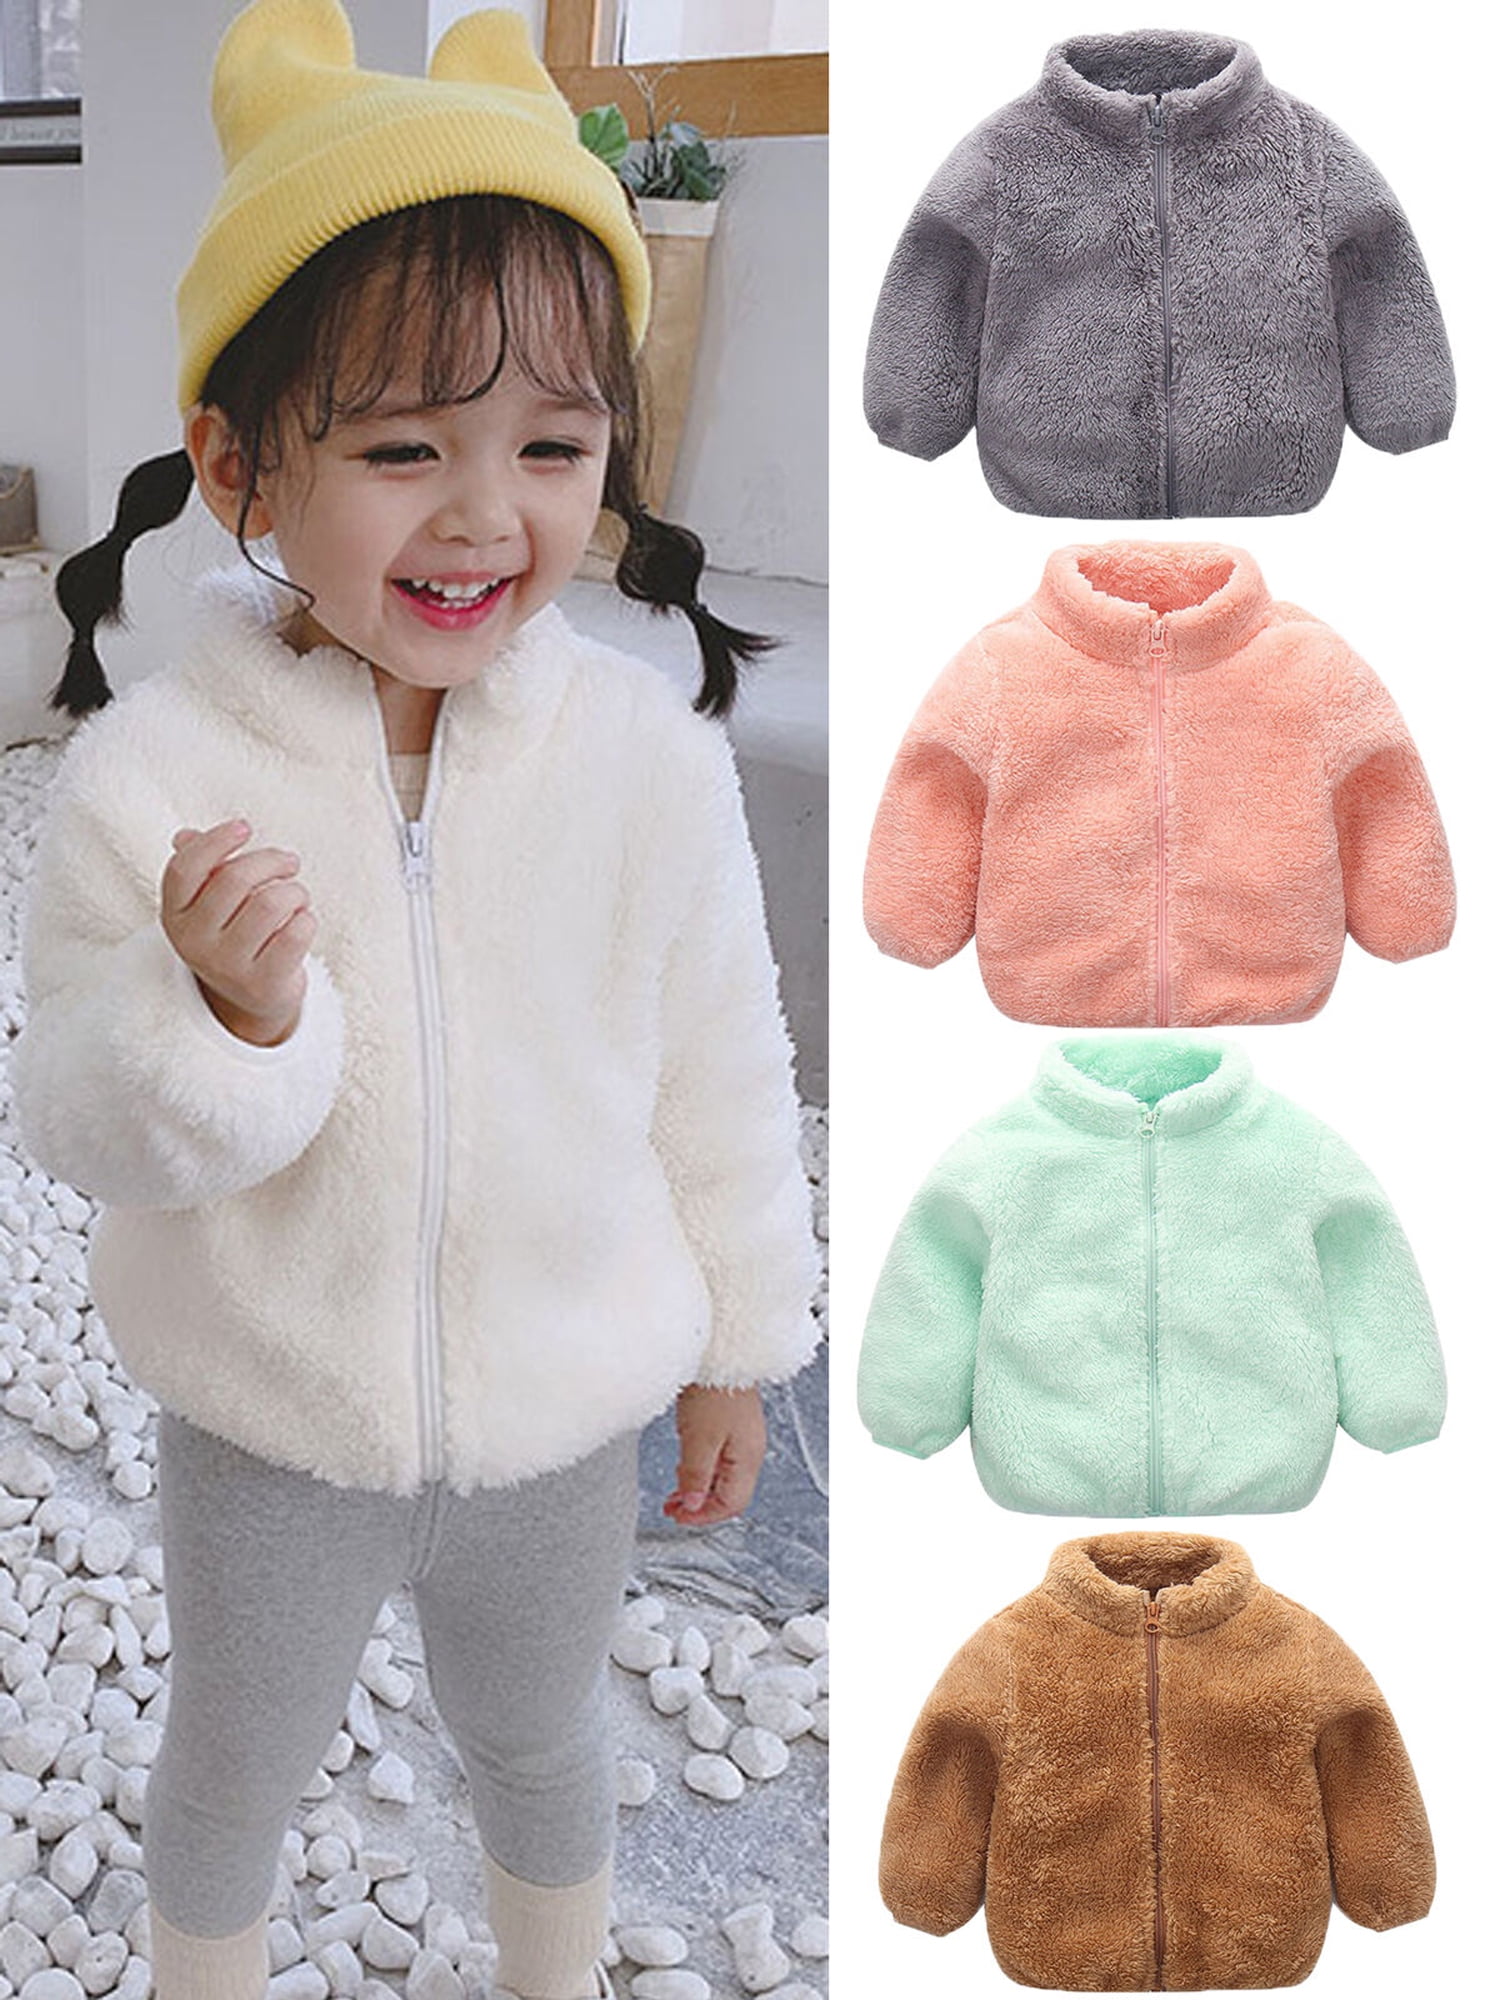 Newborn Infant Girl Warm Winter Outerwear Hooded Coat Cotton Jacket Kids Clothes 